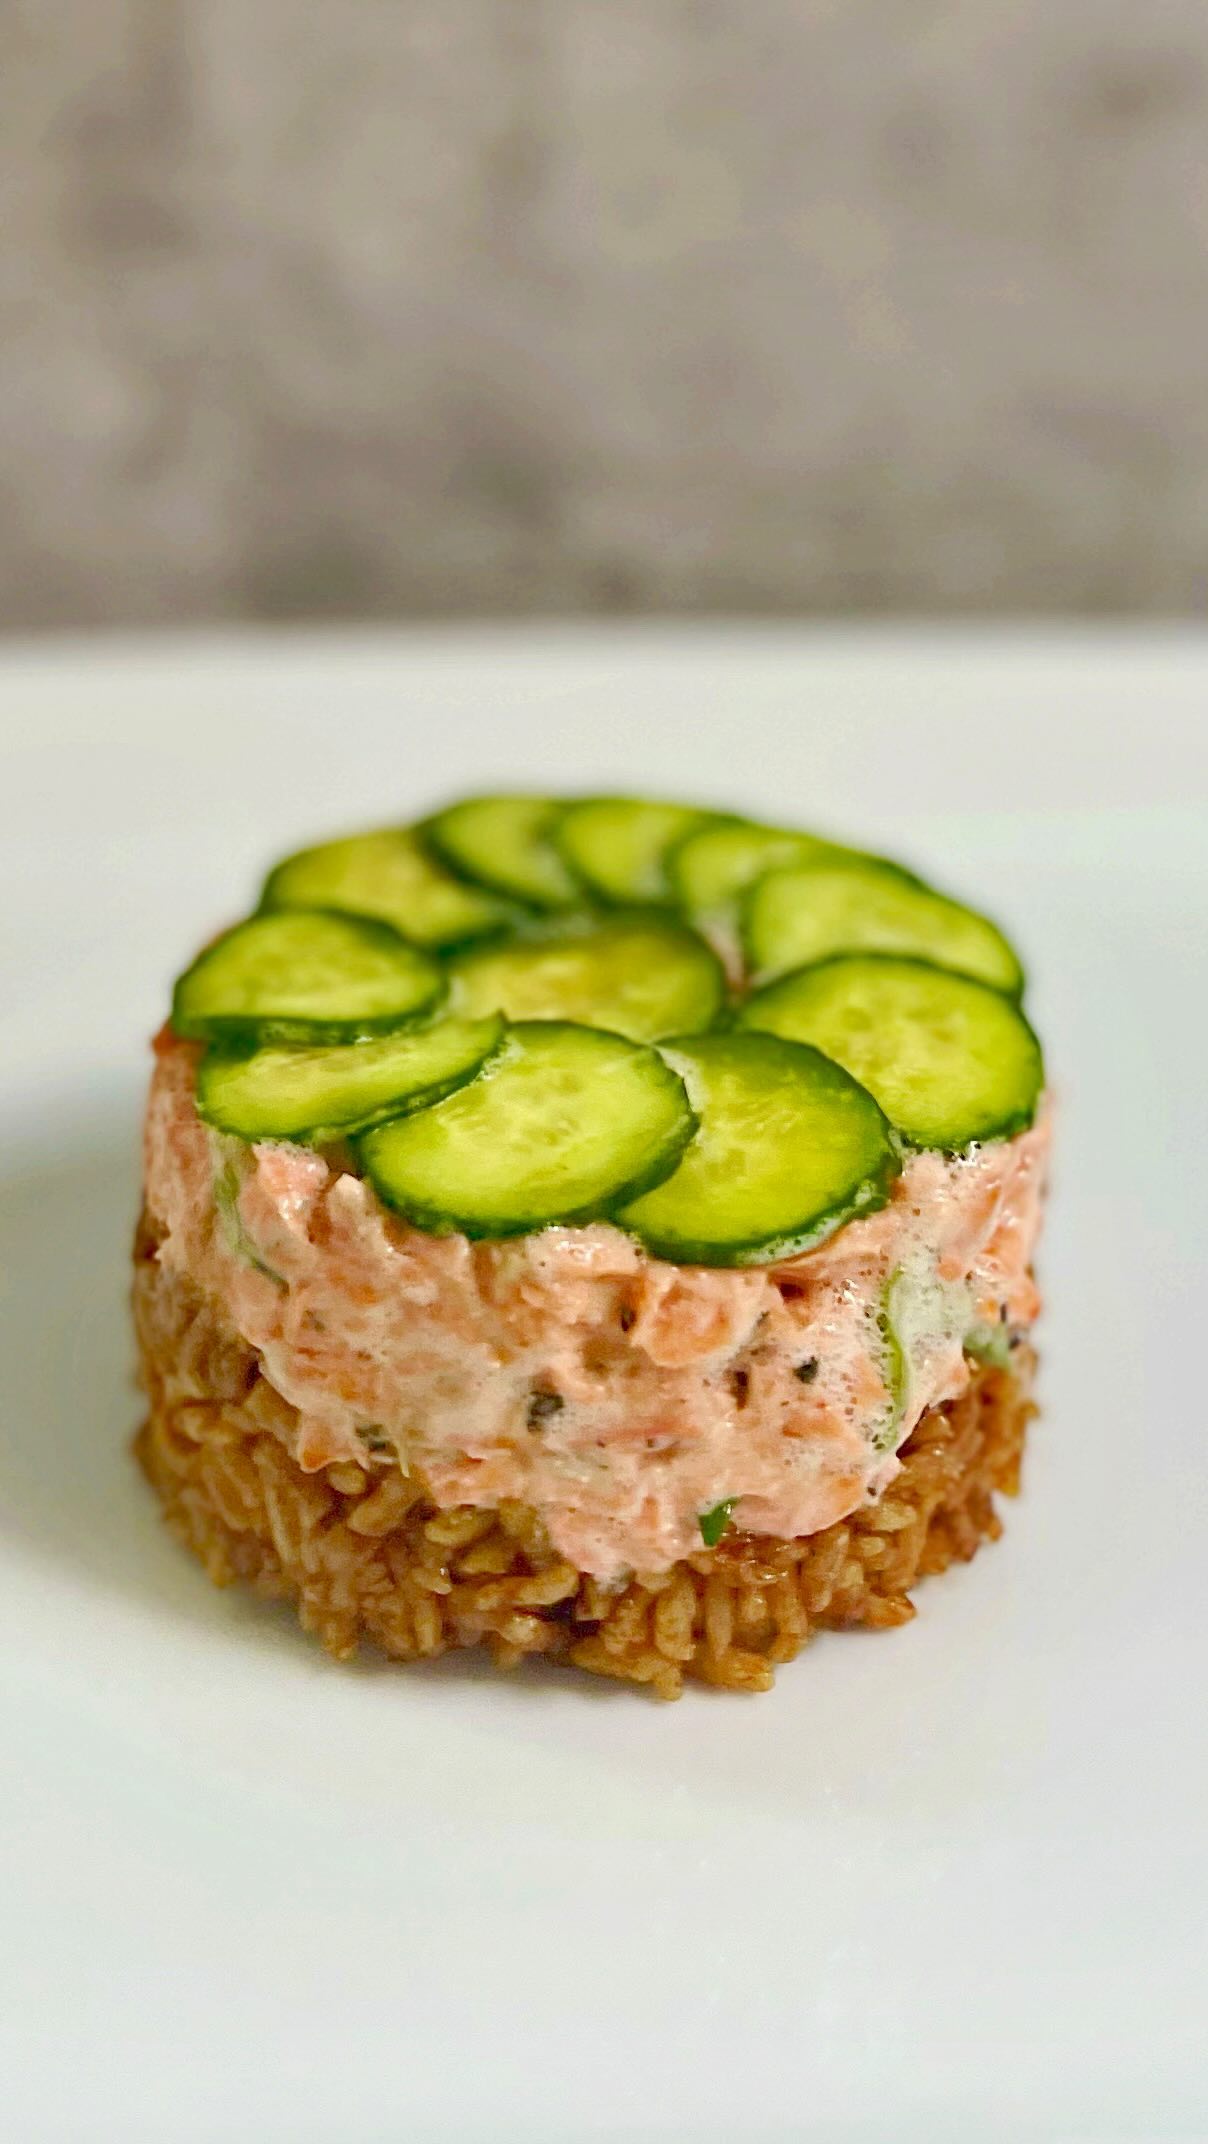 @dinnerreinvented Sushi Salmon Tower. Delicious and easy way to use up leftover salmon into a healthy protein packed app or even main dish. Lmk if you give it a try. Recipe linked in bio! #salmondinner #salmonrecipe #sushi #sushistack #salmonstack #leftovermakeover #easydinner #easyweeknightmeals #easyweeknightdinner #foodbloggers #viralreels #viralrecipe #recipereel #foodreels #cookingreel #dinnerideas #dinnerreinvented